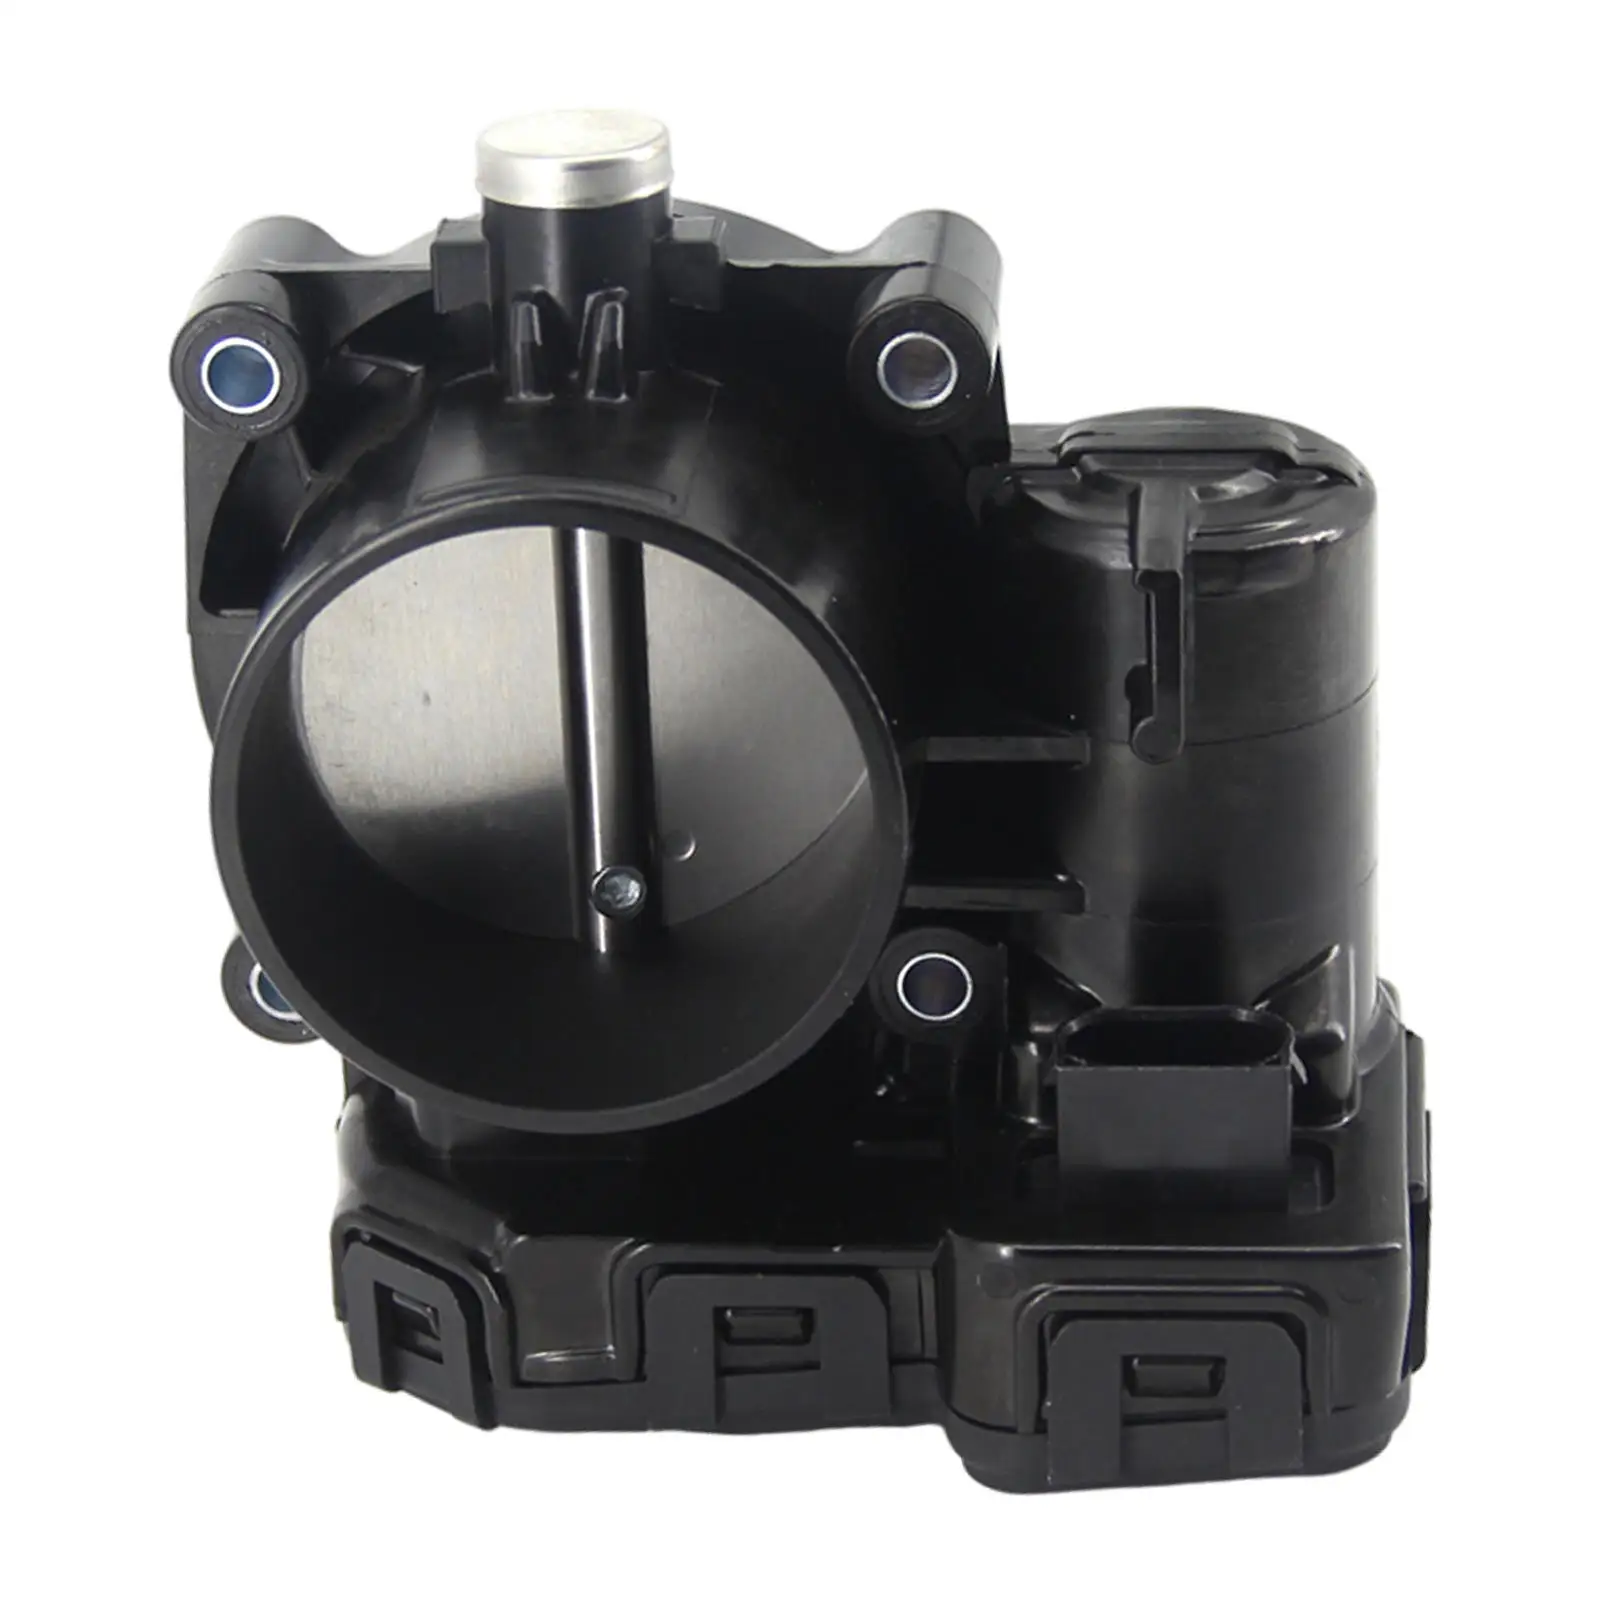 Automotive Throttle Body 4861661Ab for Jeep Wrangler Replaces Durable Accessories Professional